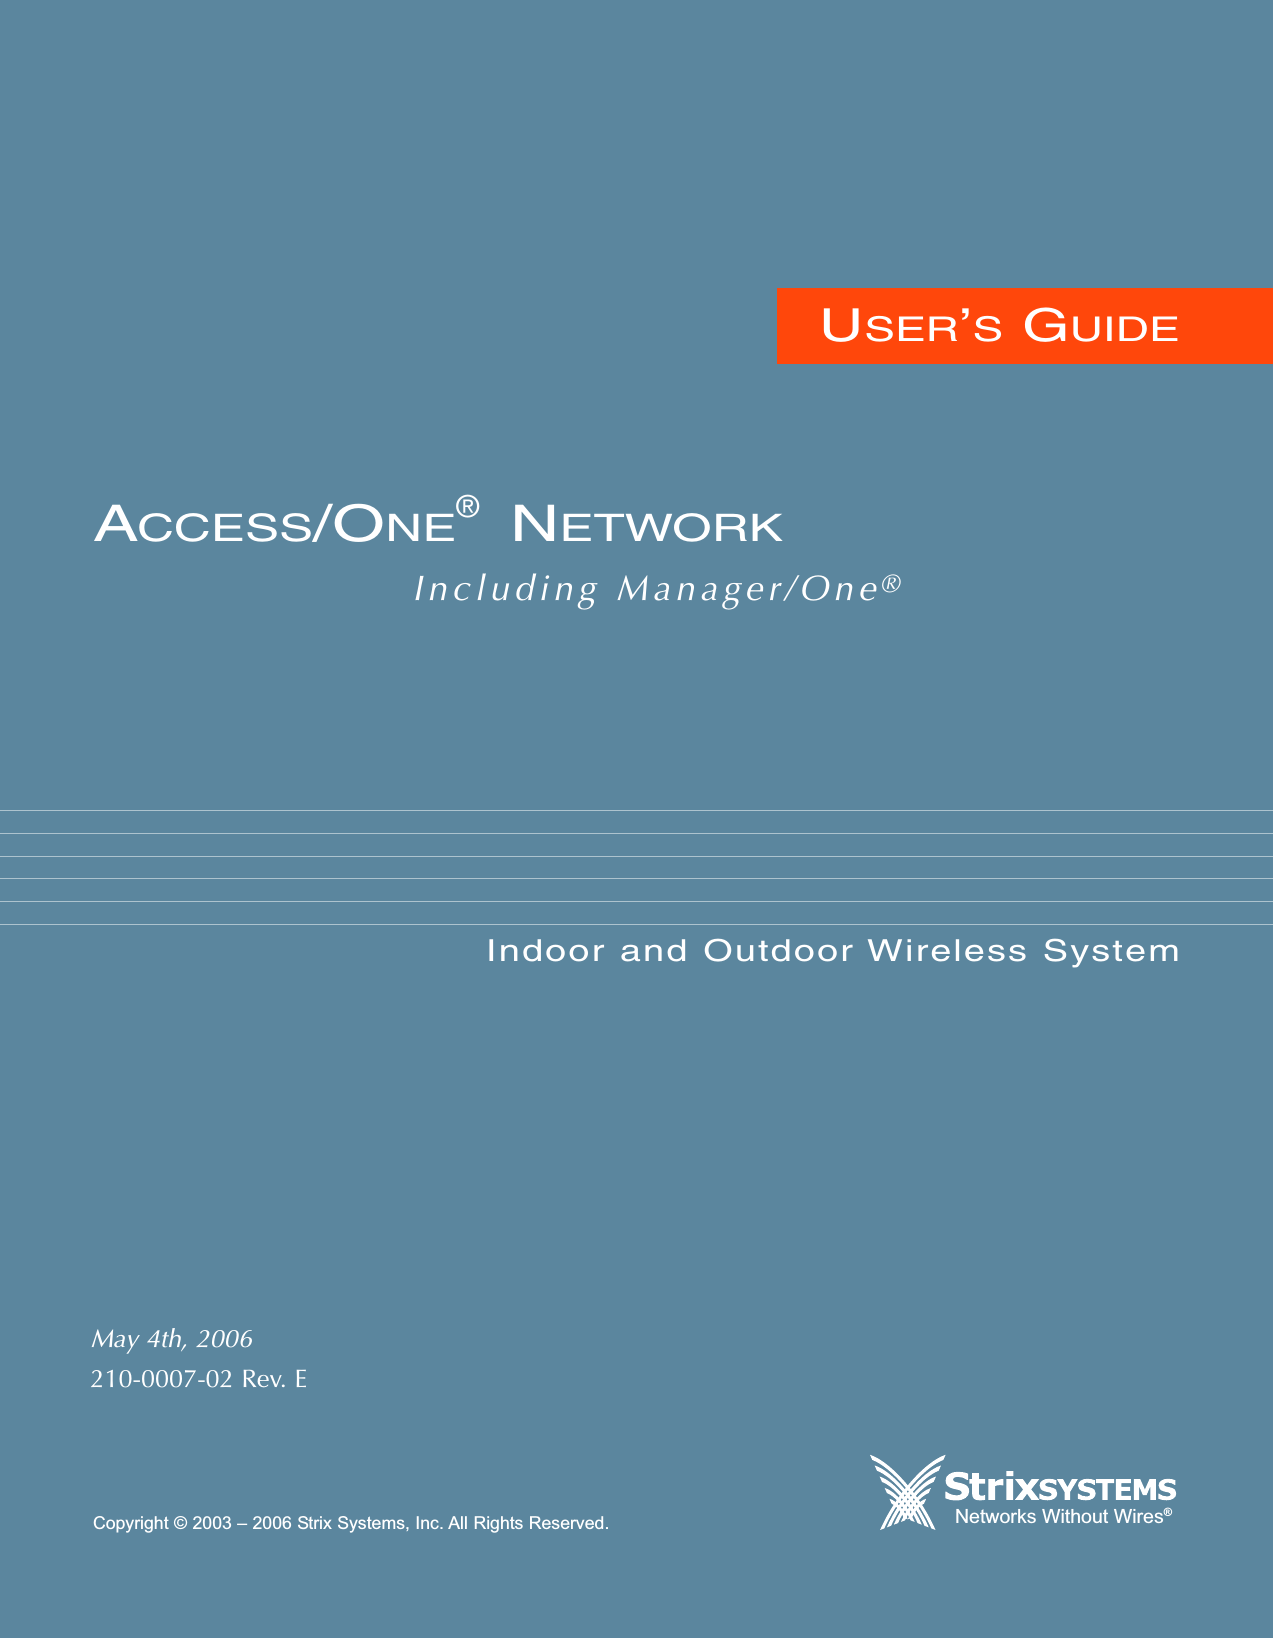 USER’SGUIDEIncluding Manager/One®ACCESS/ONE®NETWORKIndoor and Outdoor Wireless SystemNetworks Without Wires®Copyright © 2003 – 2006 Strix Systems, Inc. All Rights Reserved.May 4th, 2006210-0007-02 Rev. E